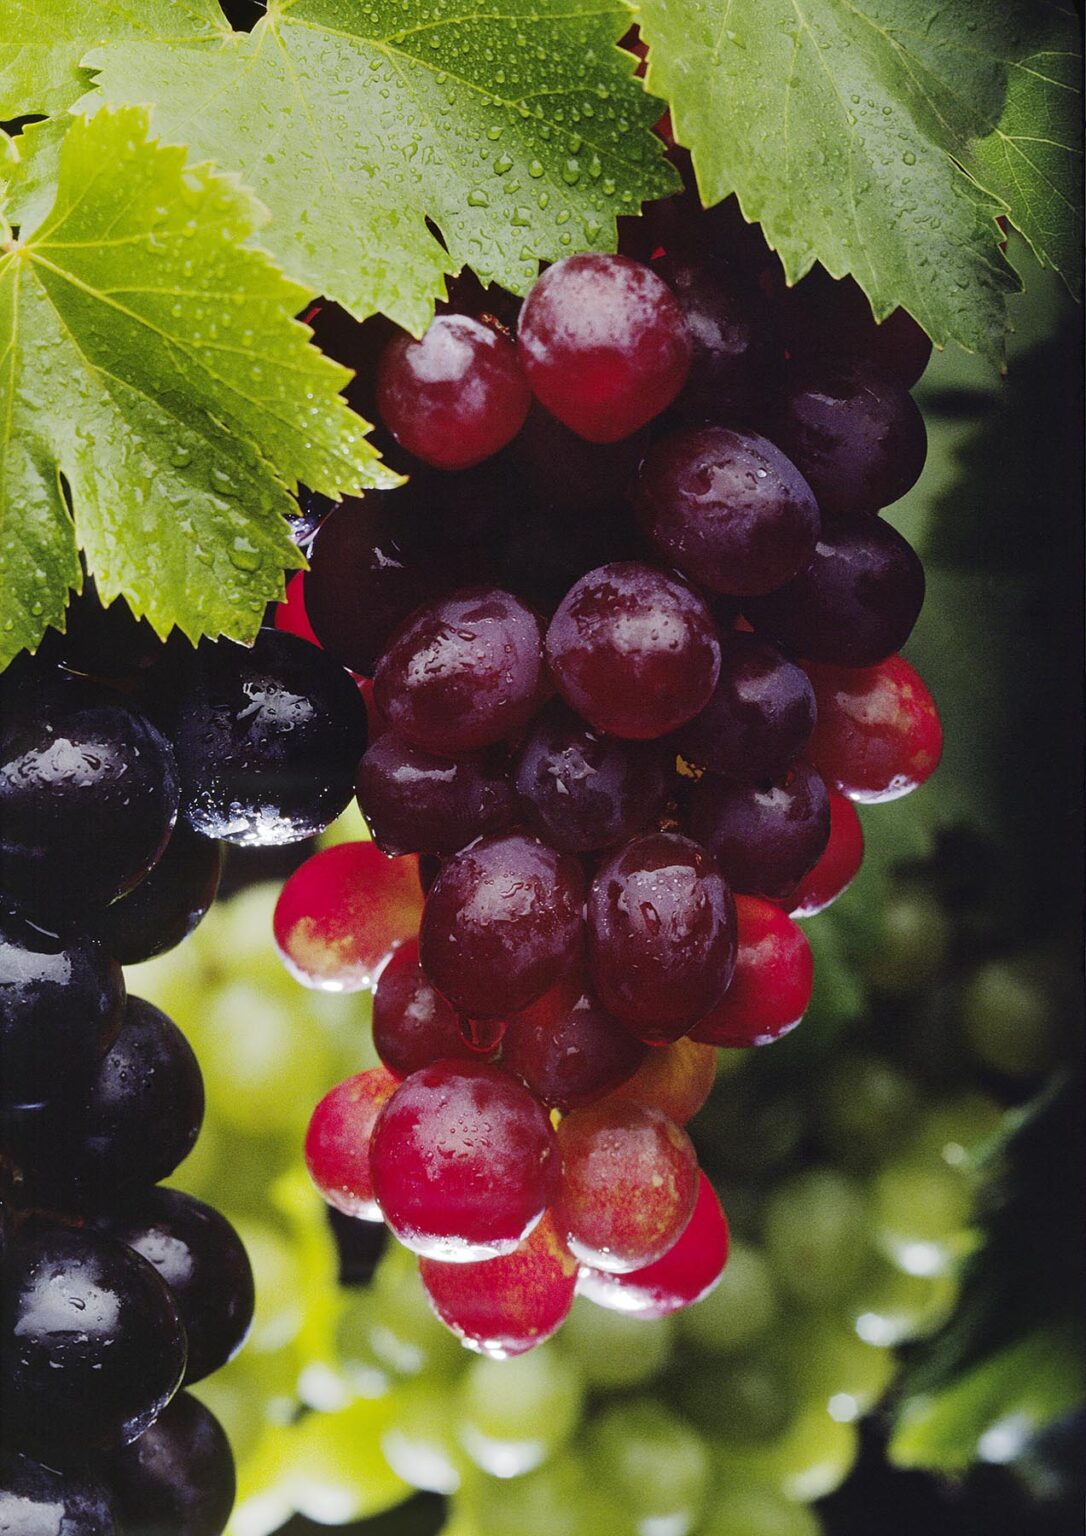 A variety of TABLE GRAPES